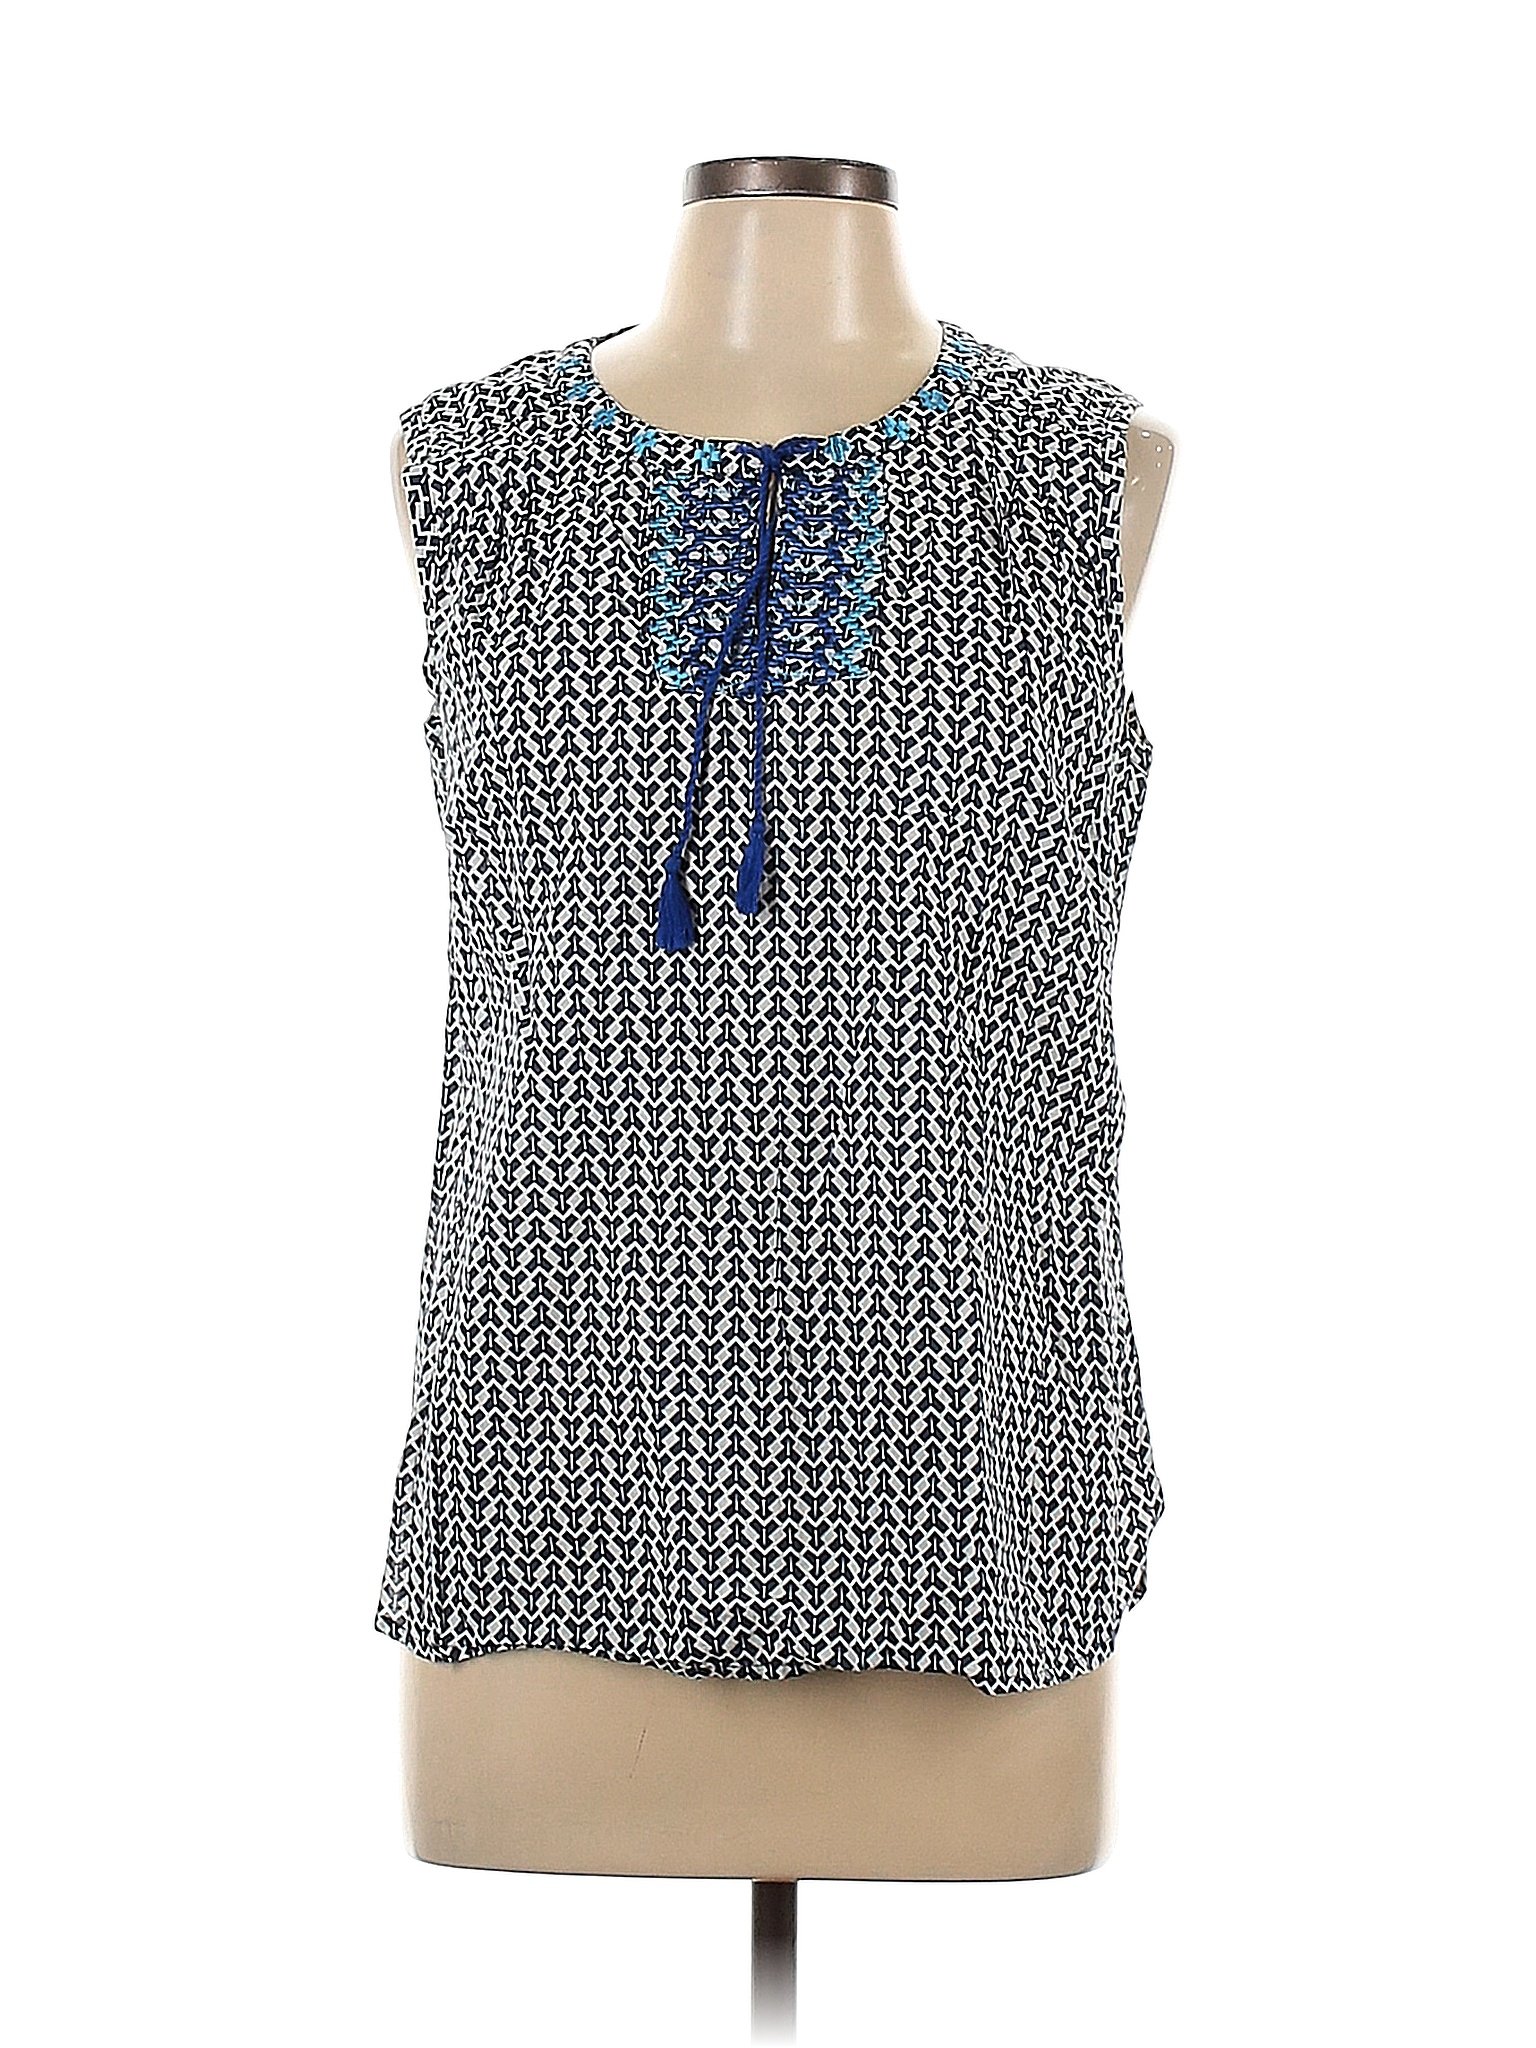 Basic Editions 100% Cotton Blue Sleeveless Blouse Size L - 52% off ...